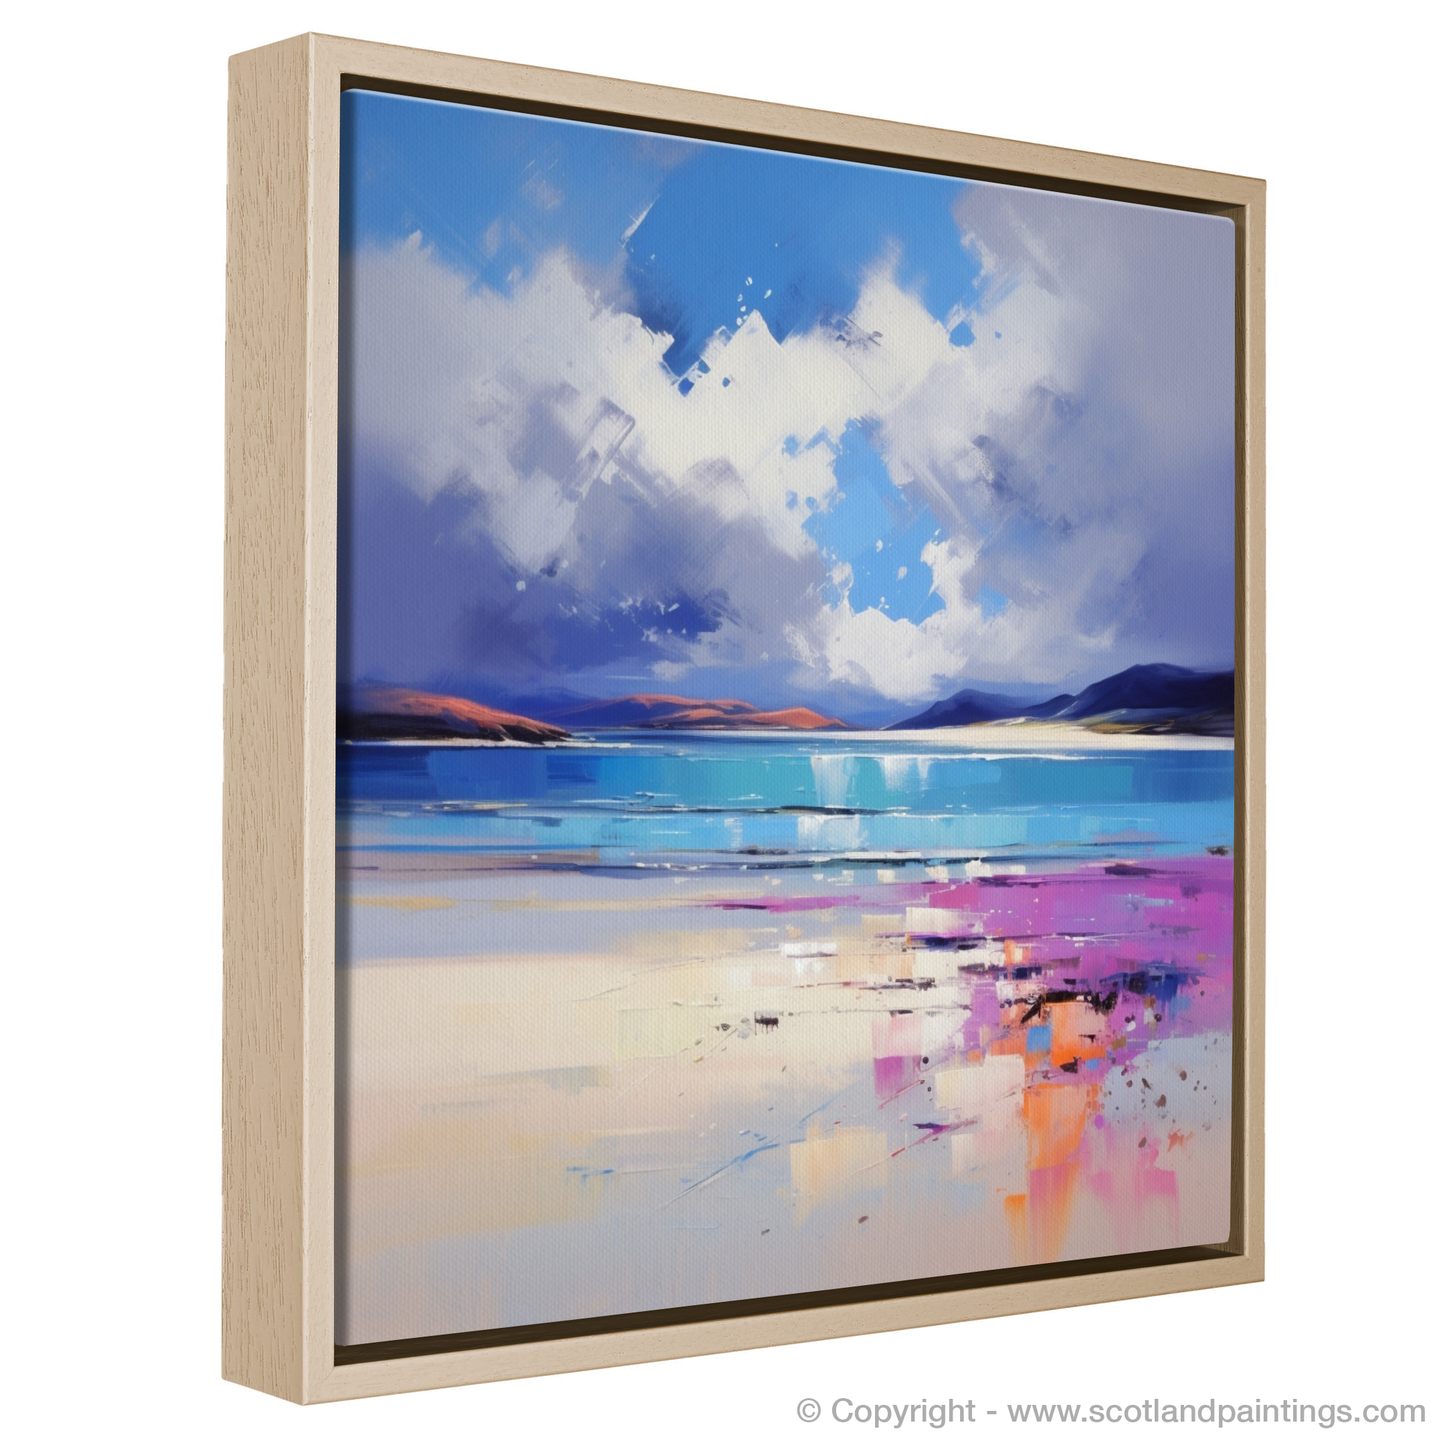 Painting and Art Print of Luskentyre Beach, Isle of Harris entitled "Luskentyre Dreamscape: An Expressionist Ode to Scottish Shores".